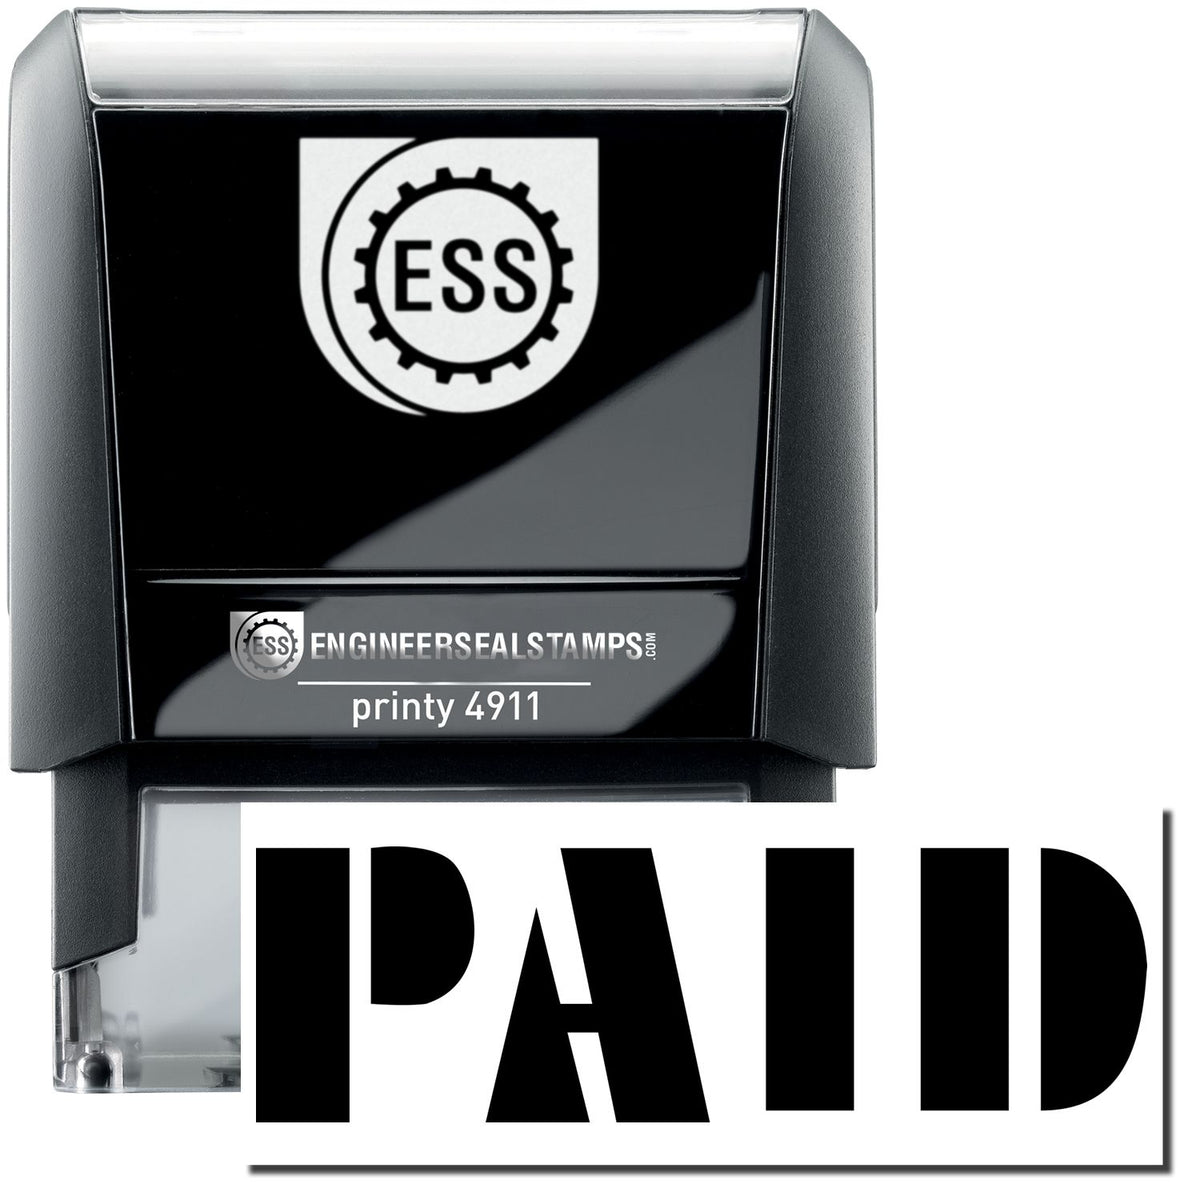 A self-inking stamp with a stamped image showing how the text &quot;PAID&quot; in bold font is displayed after stamping.